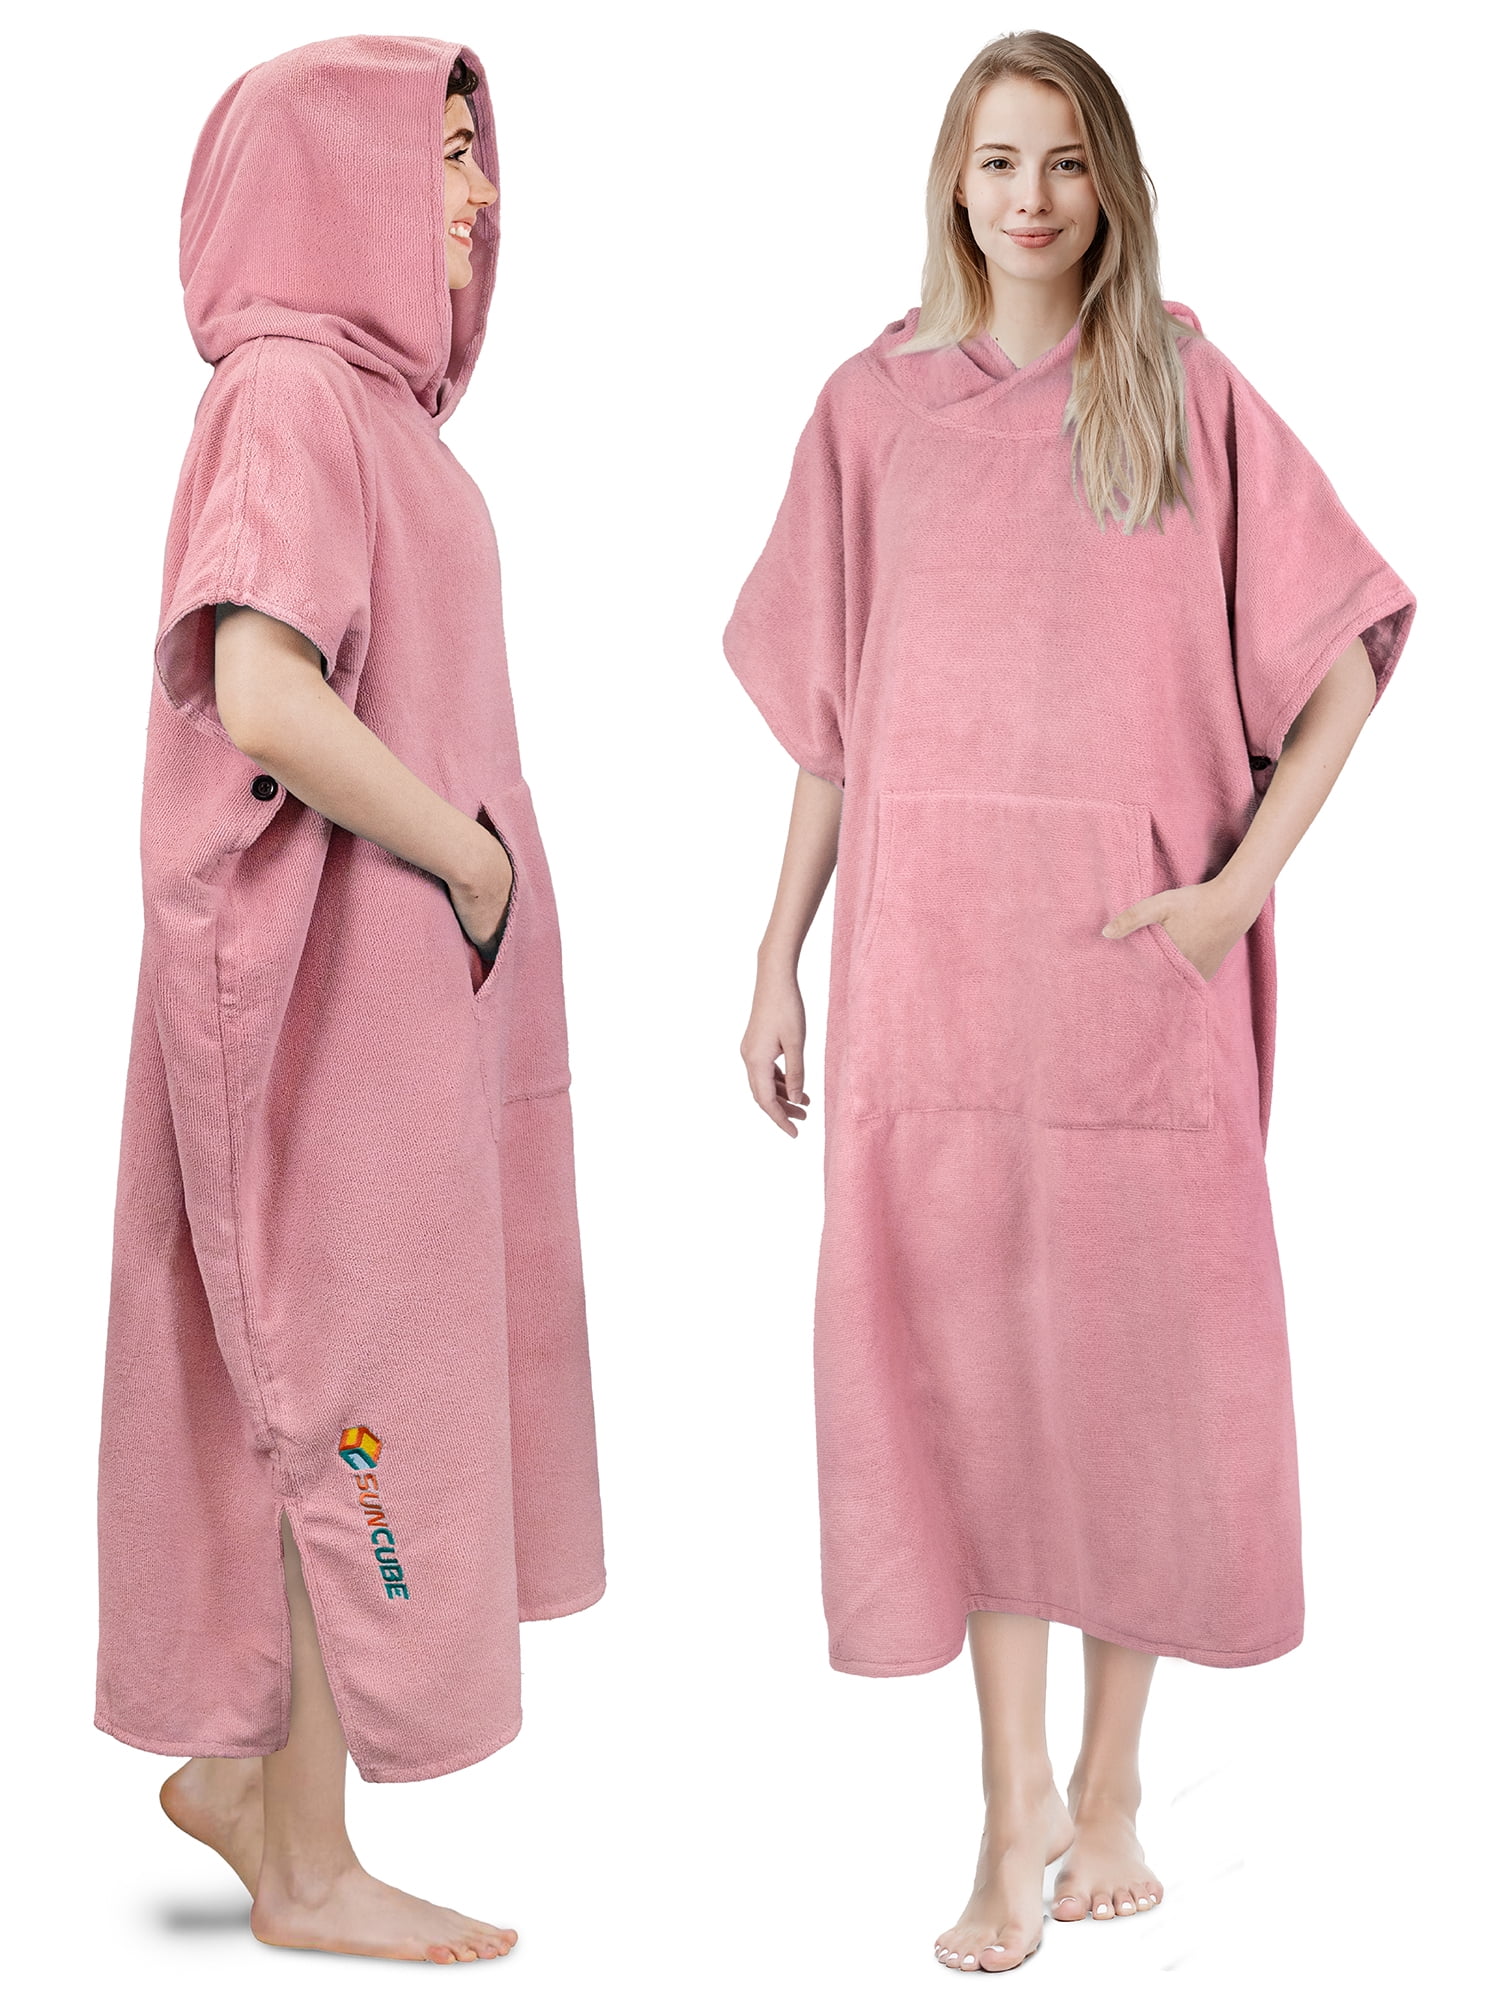 Adult Quick Dry Microfiber Towel Changing Robe Surf Beach Bath Hooded Poncho 